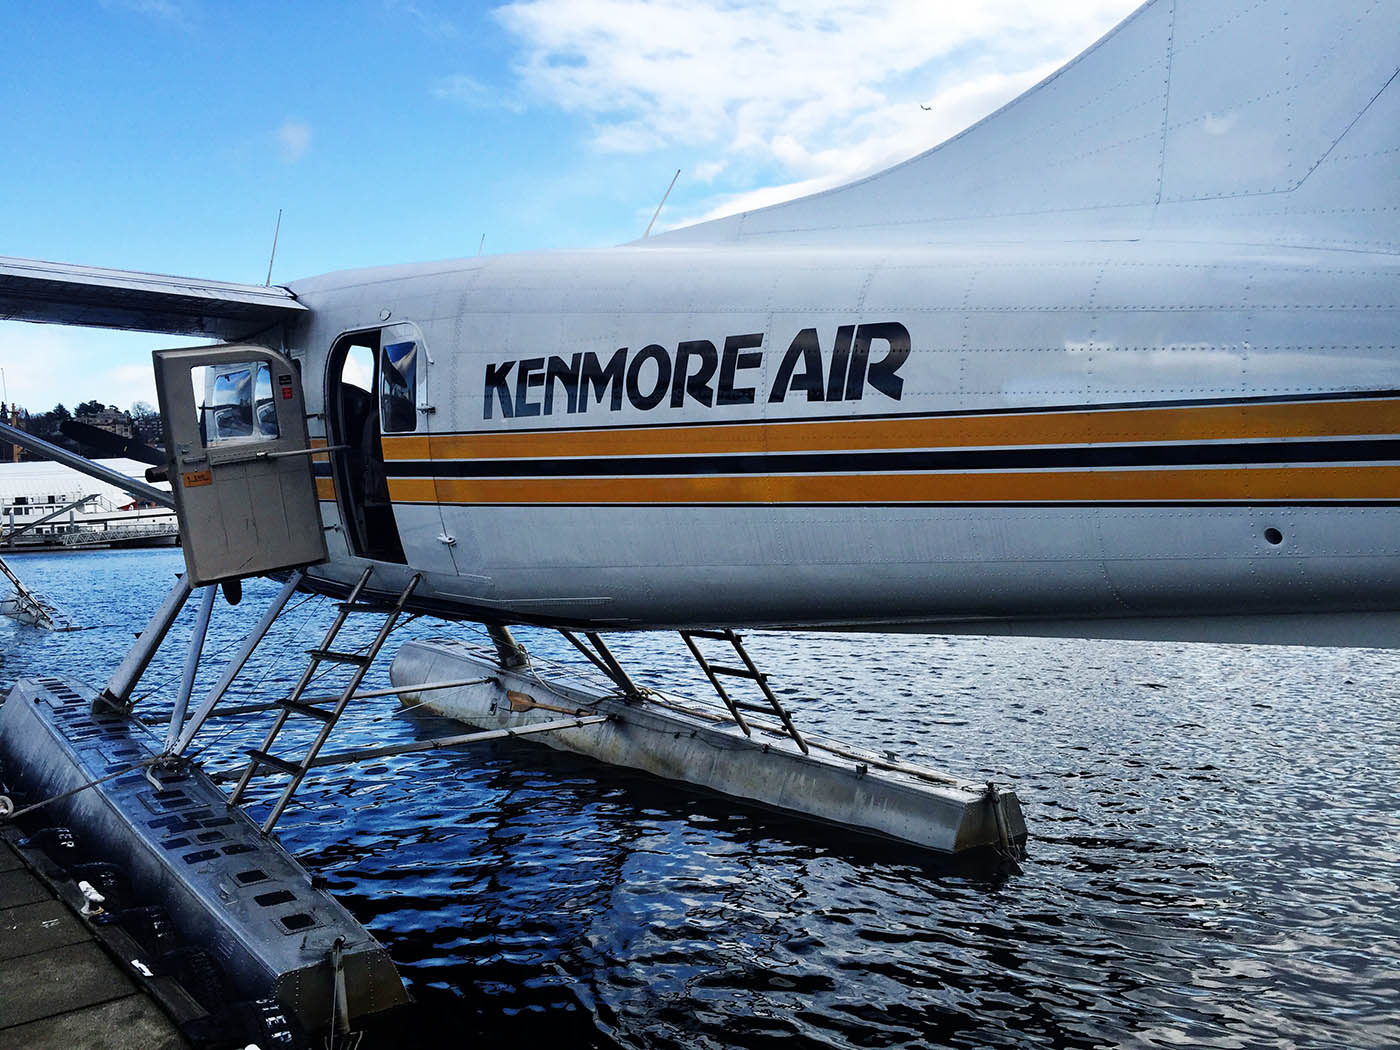 Seaplane view with Kenmore Air